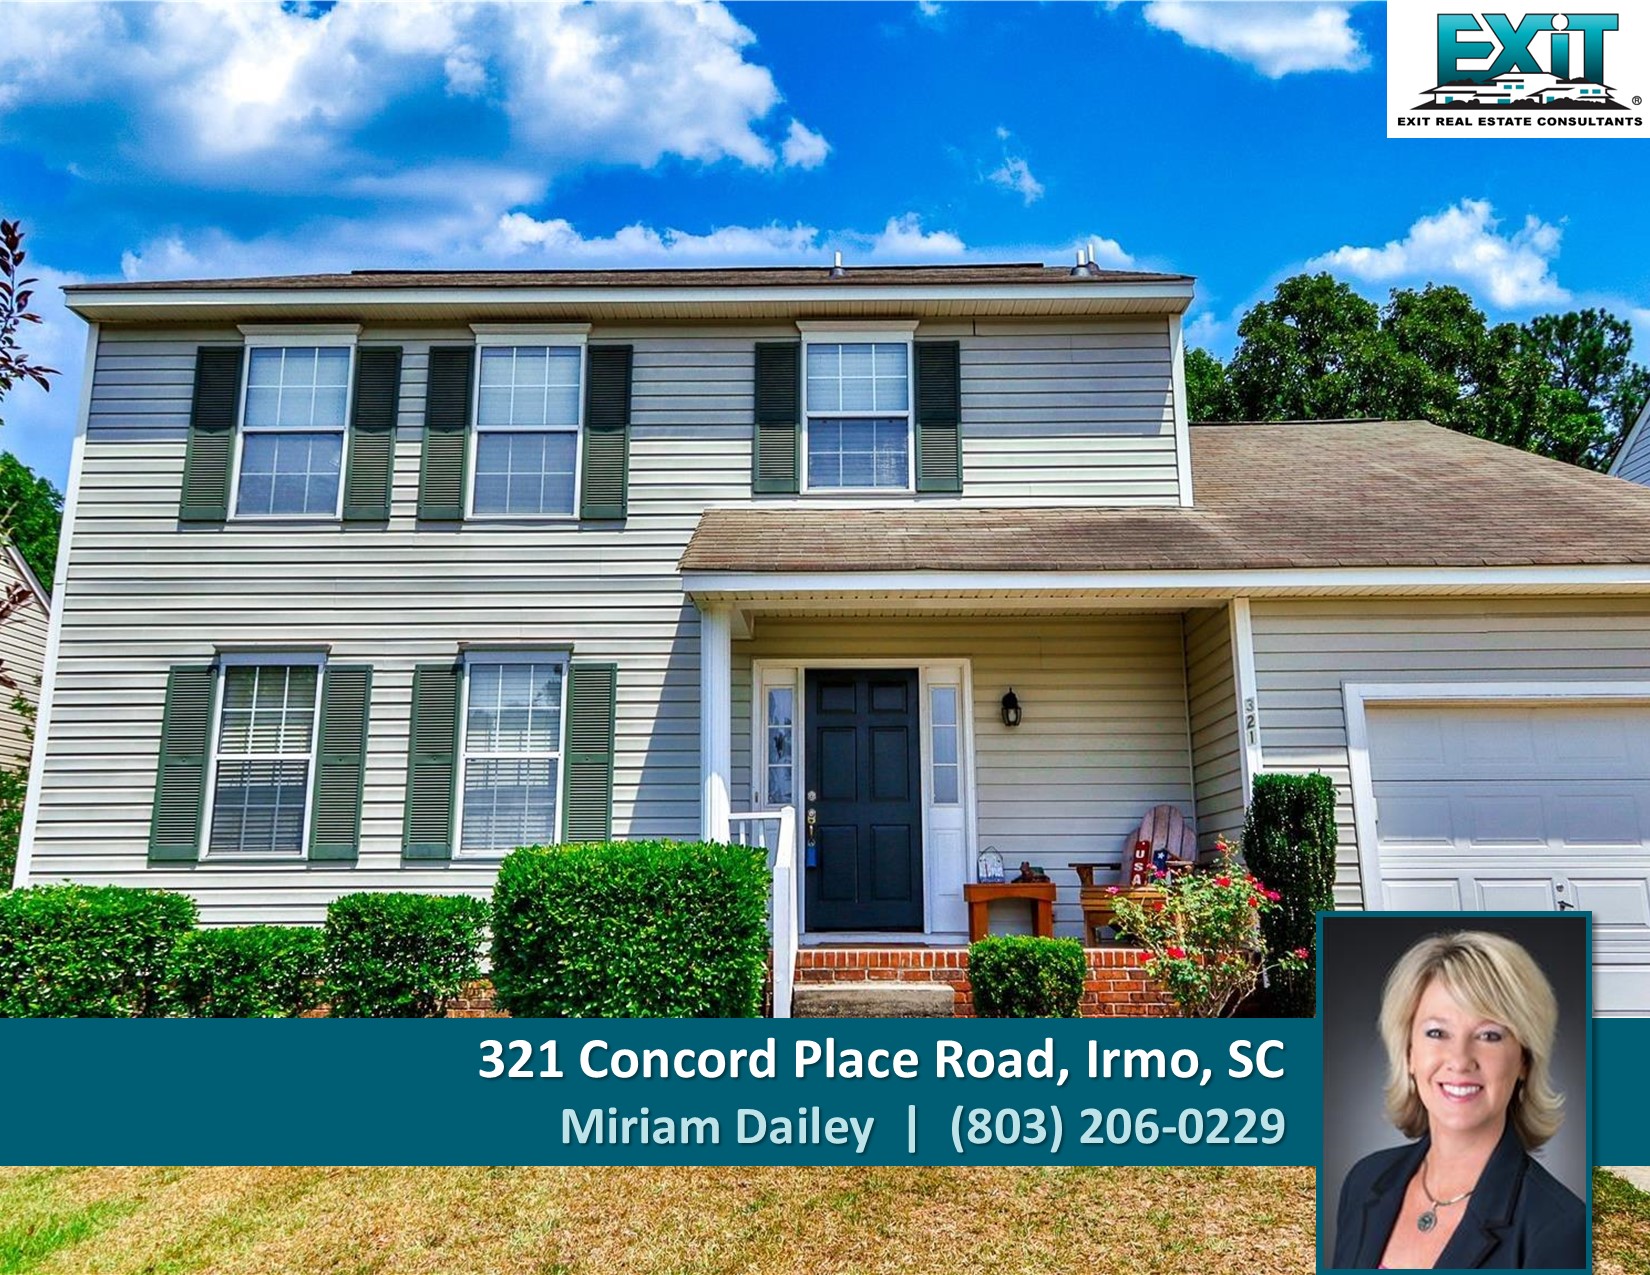 Just listed in Concord Place - Irmo